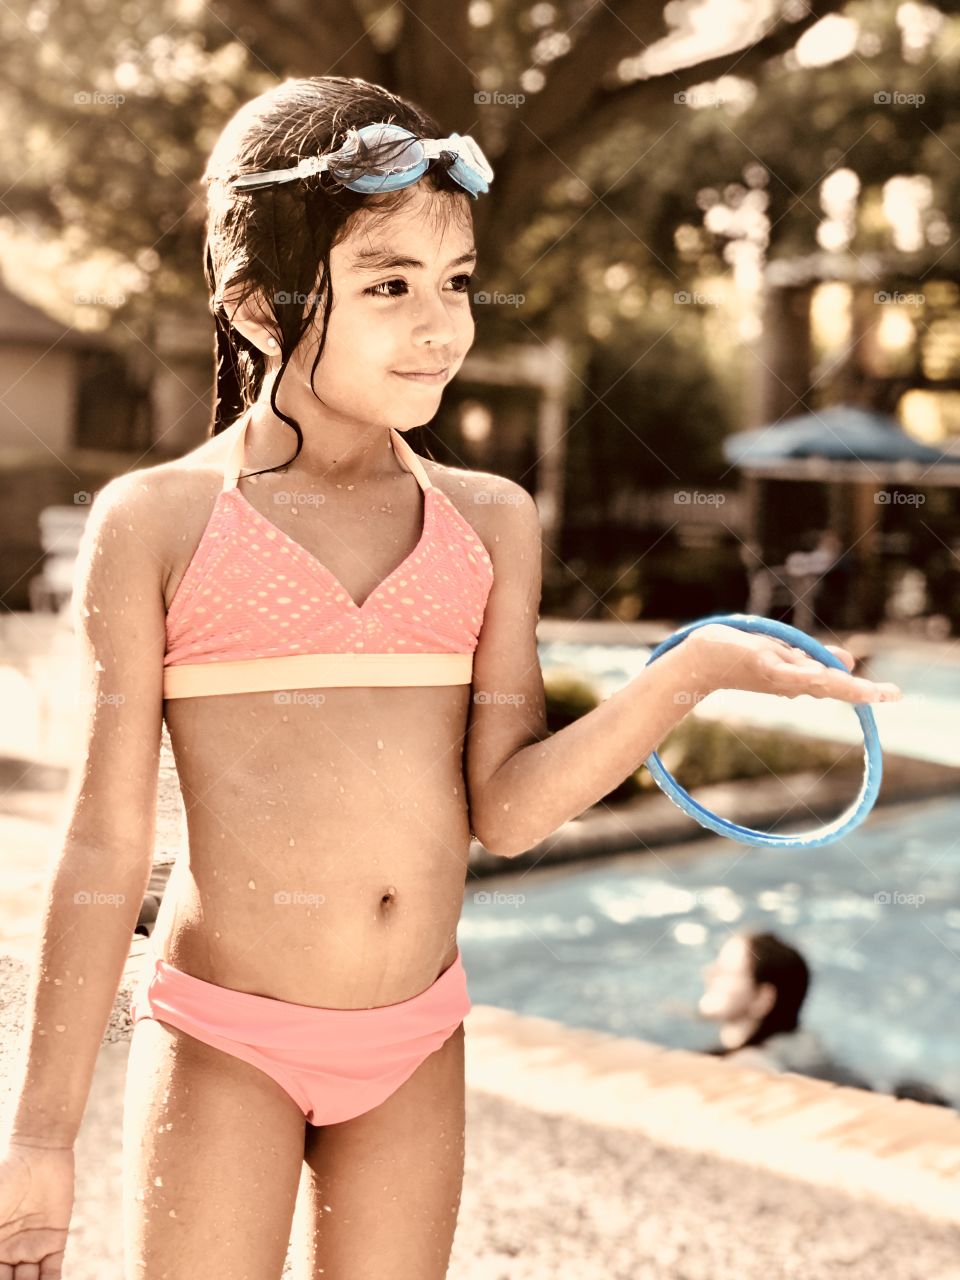 My daughter posing by the pool this summer